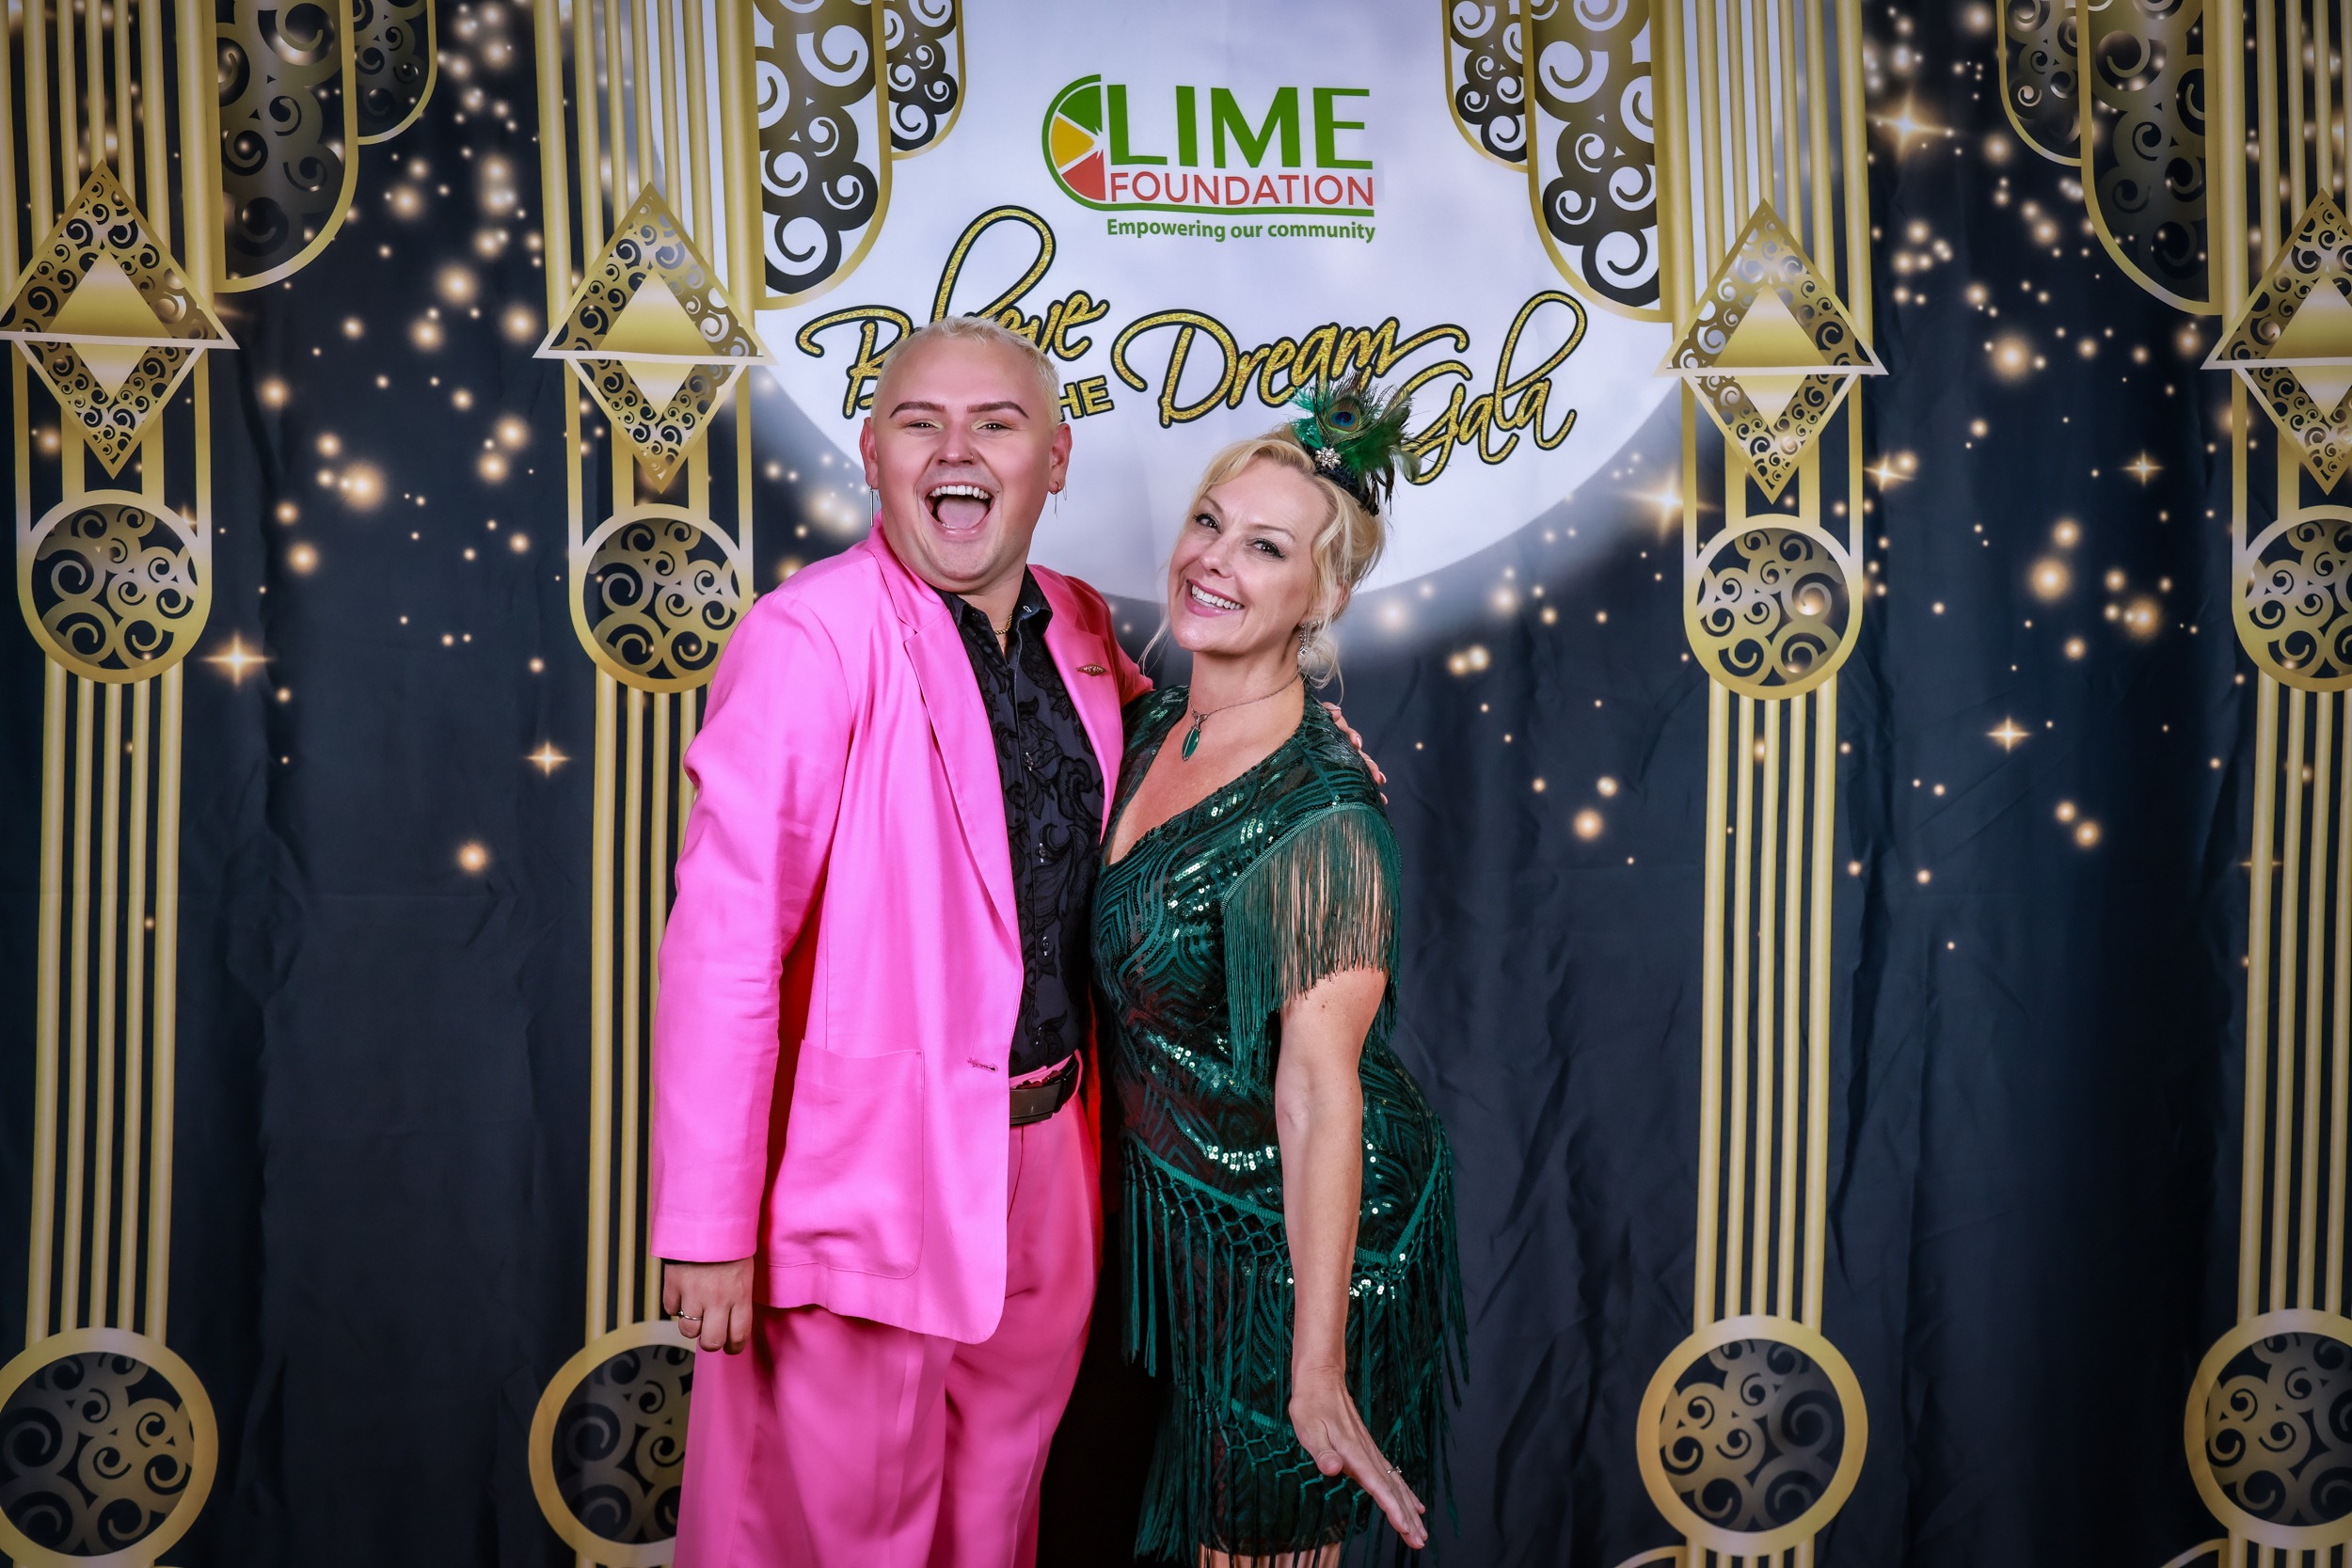 A man and woman posing for a photo in pink outfits at The LIME Foundation of Santa Rosa.